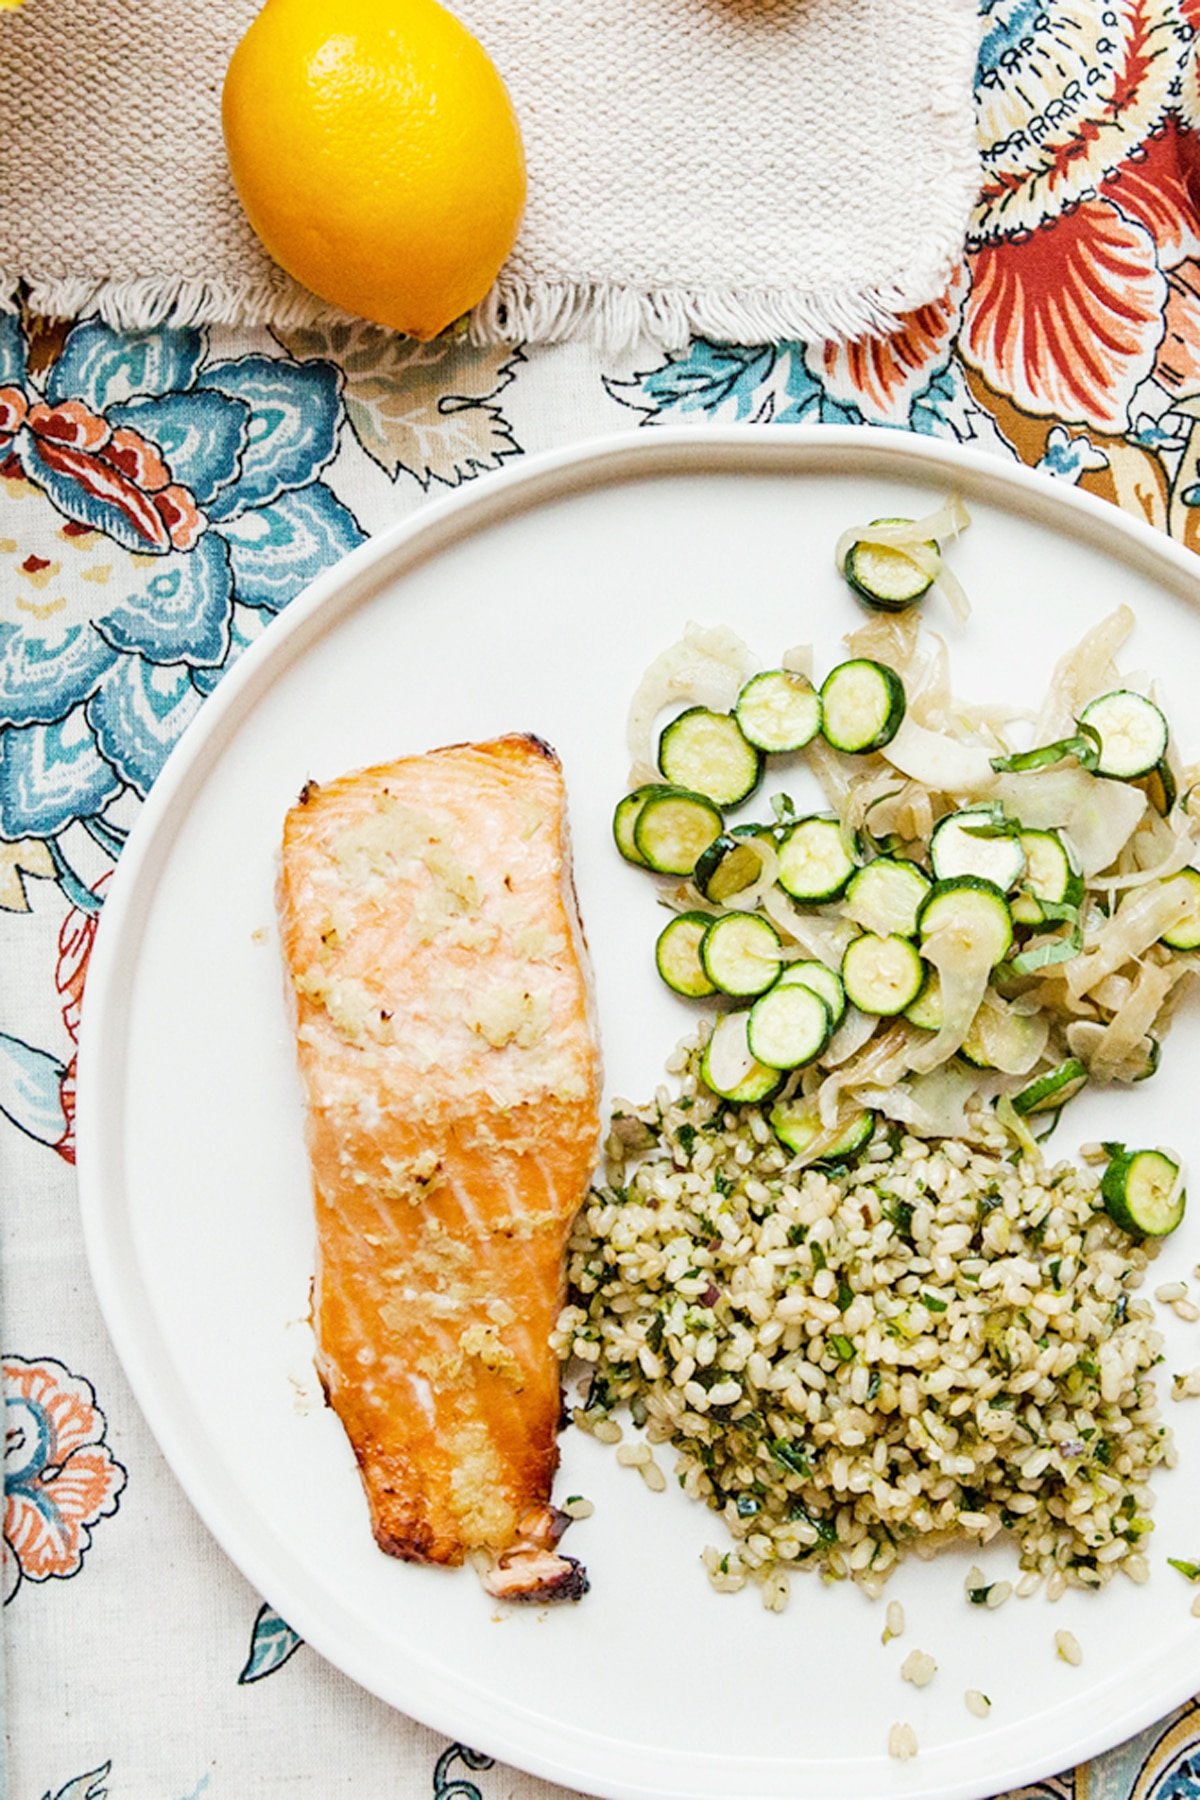 Thai Salmon with Herby Brown Rice and sauteed zucchini on a plate.